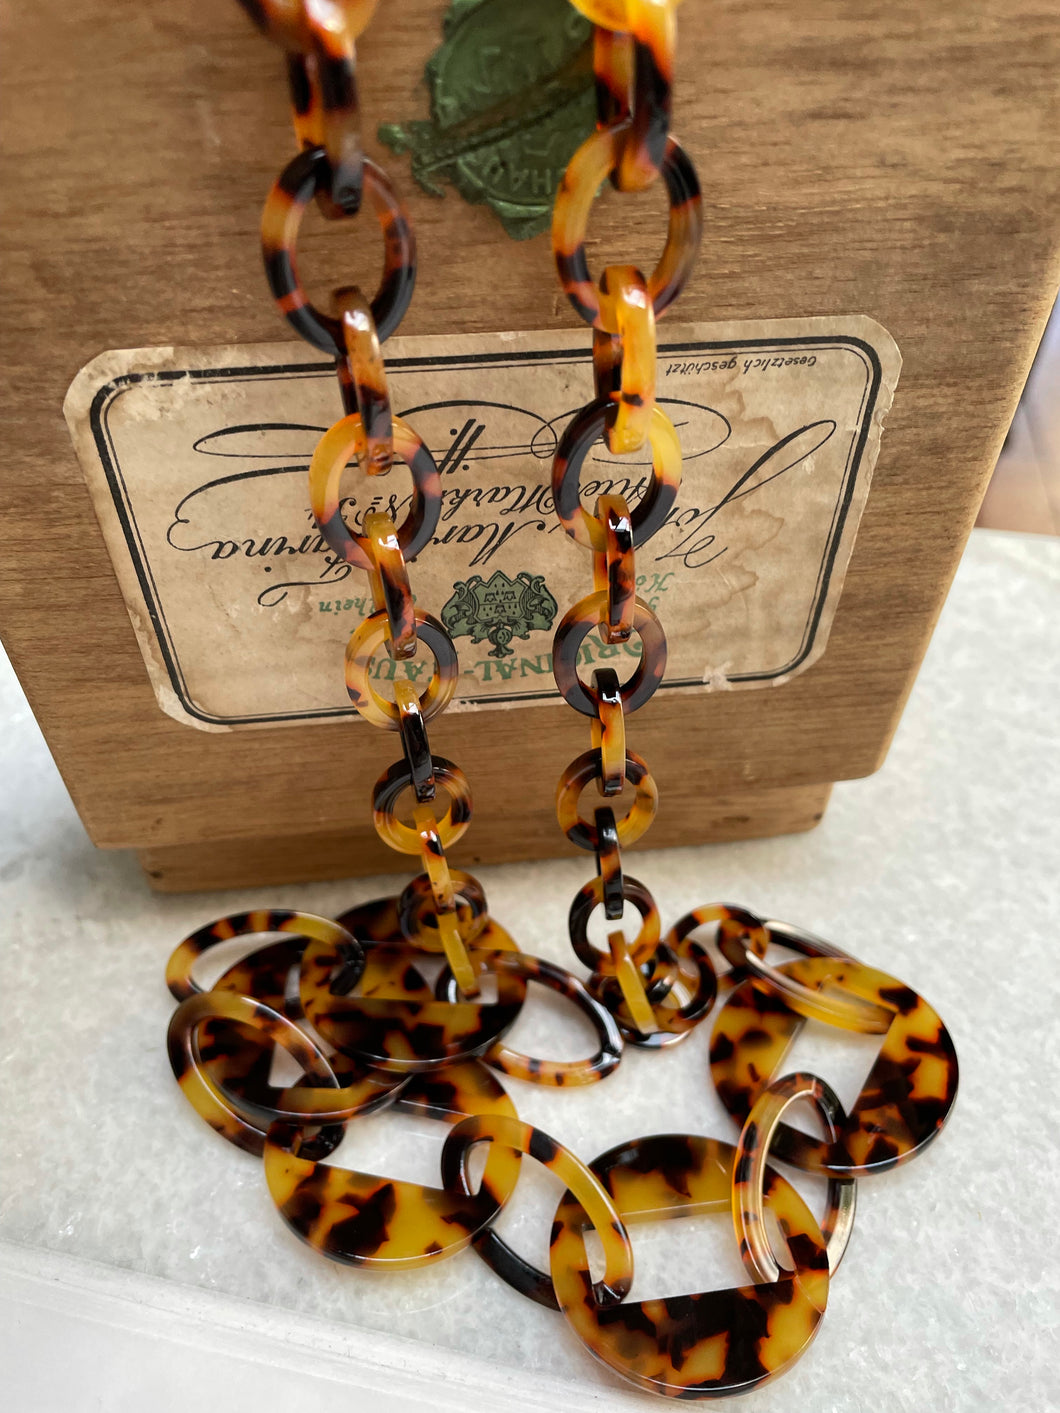 Tortoiseshell Chain and Link Necklace